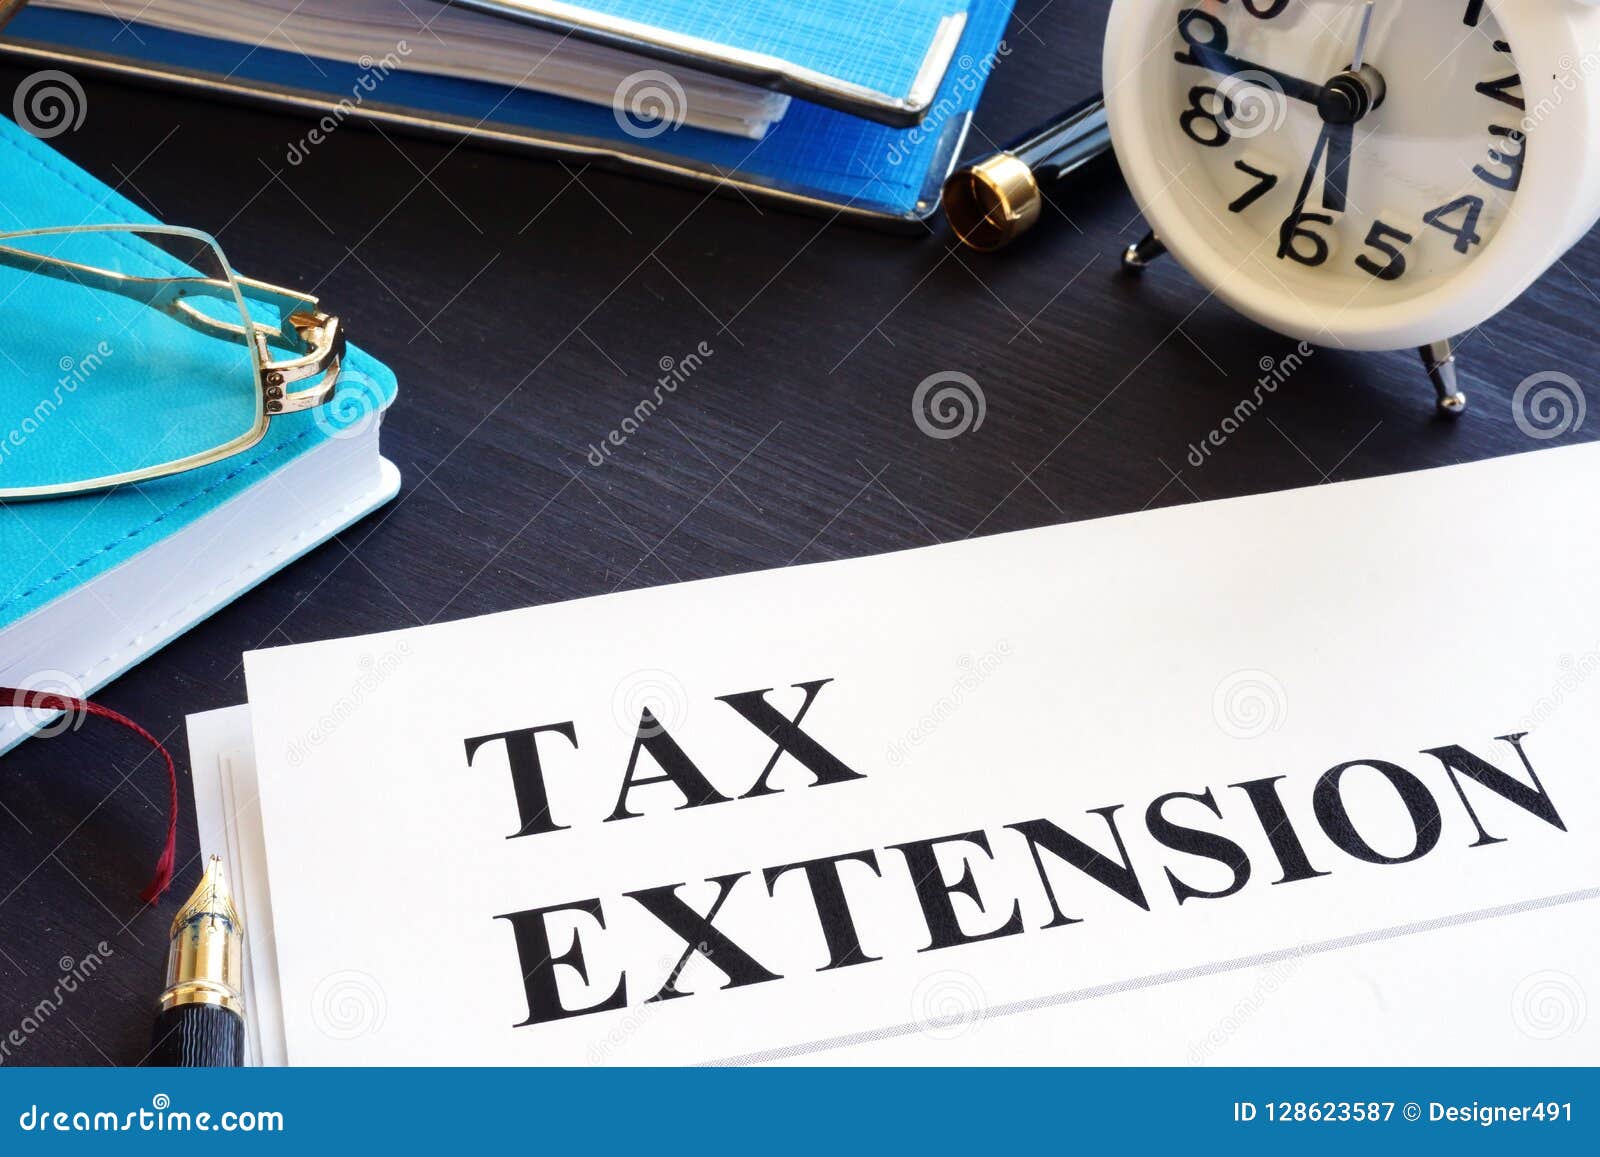 tax extension. folder with documents and clock.